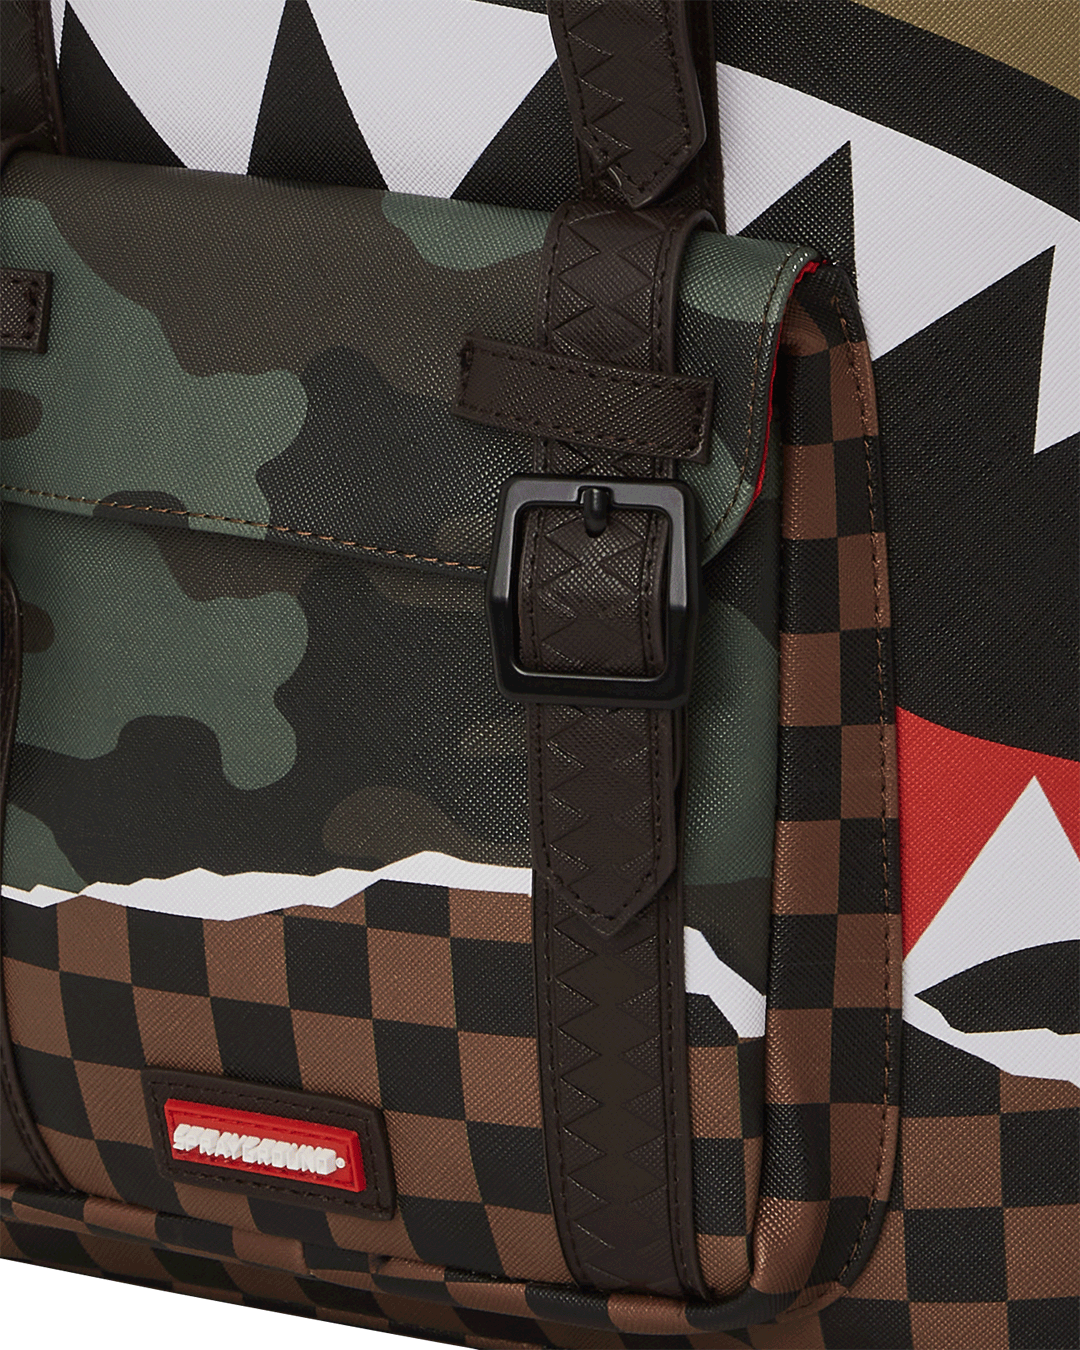 TEAR IT UP CAMO HILLS BACKPACK